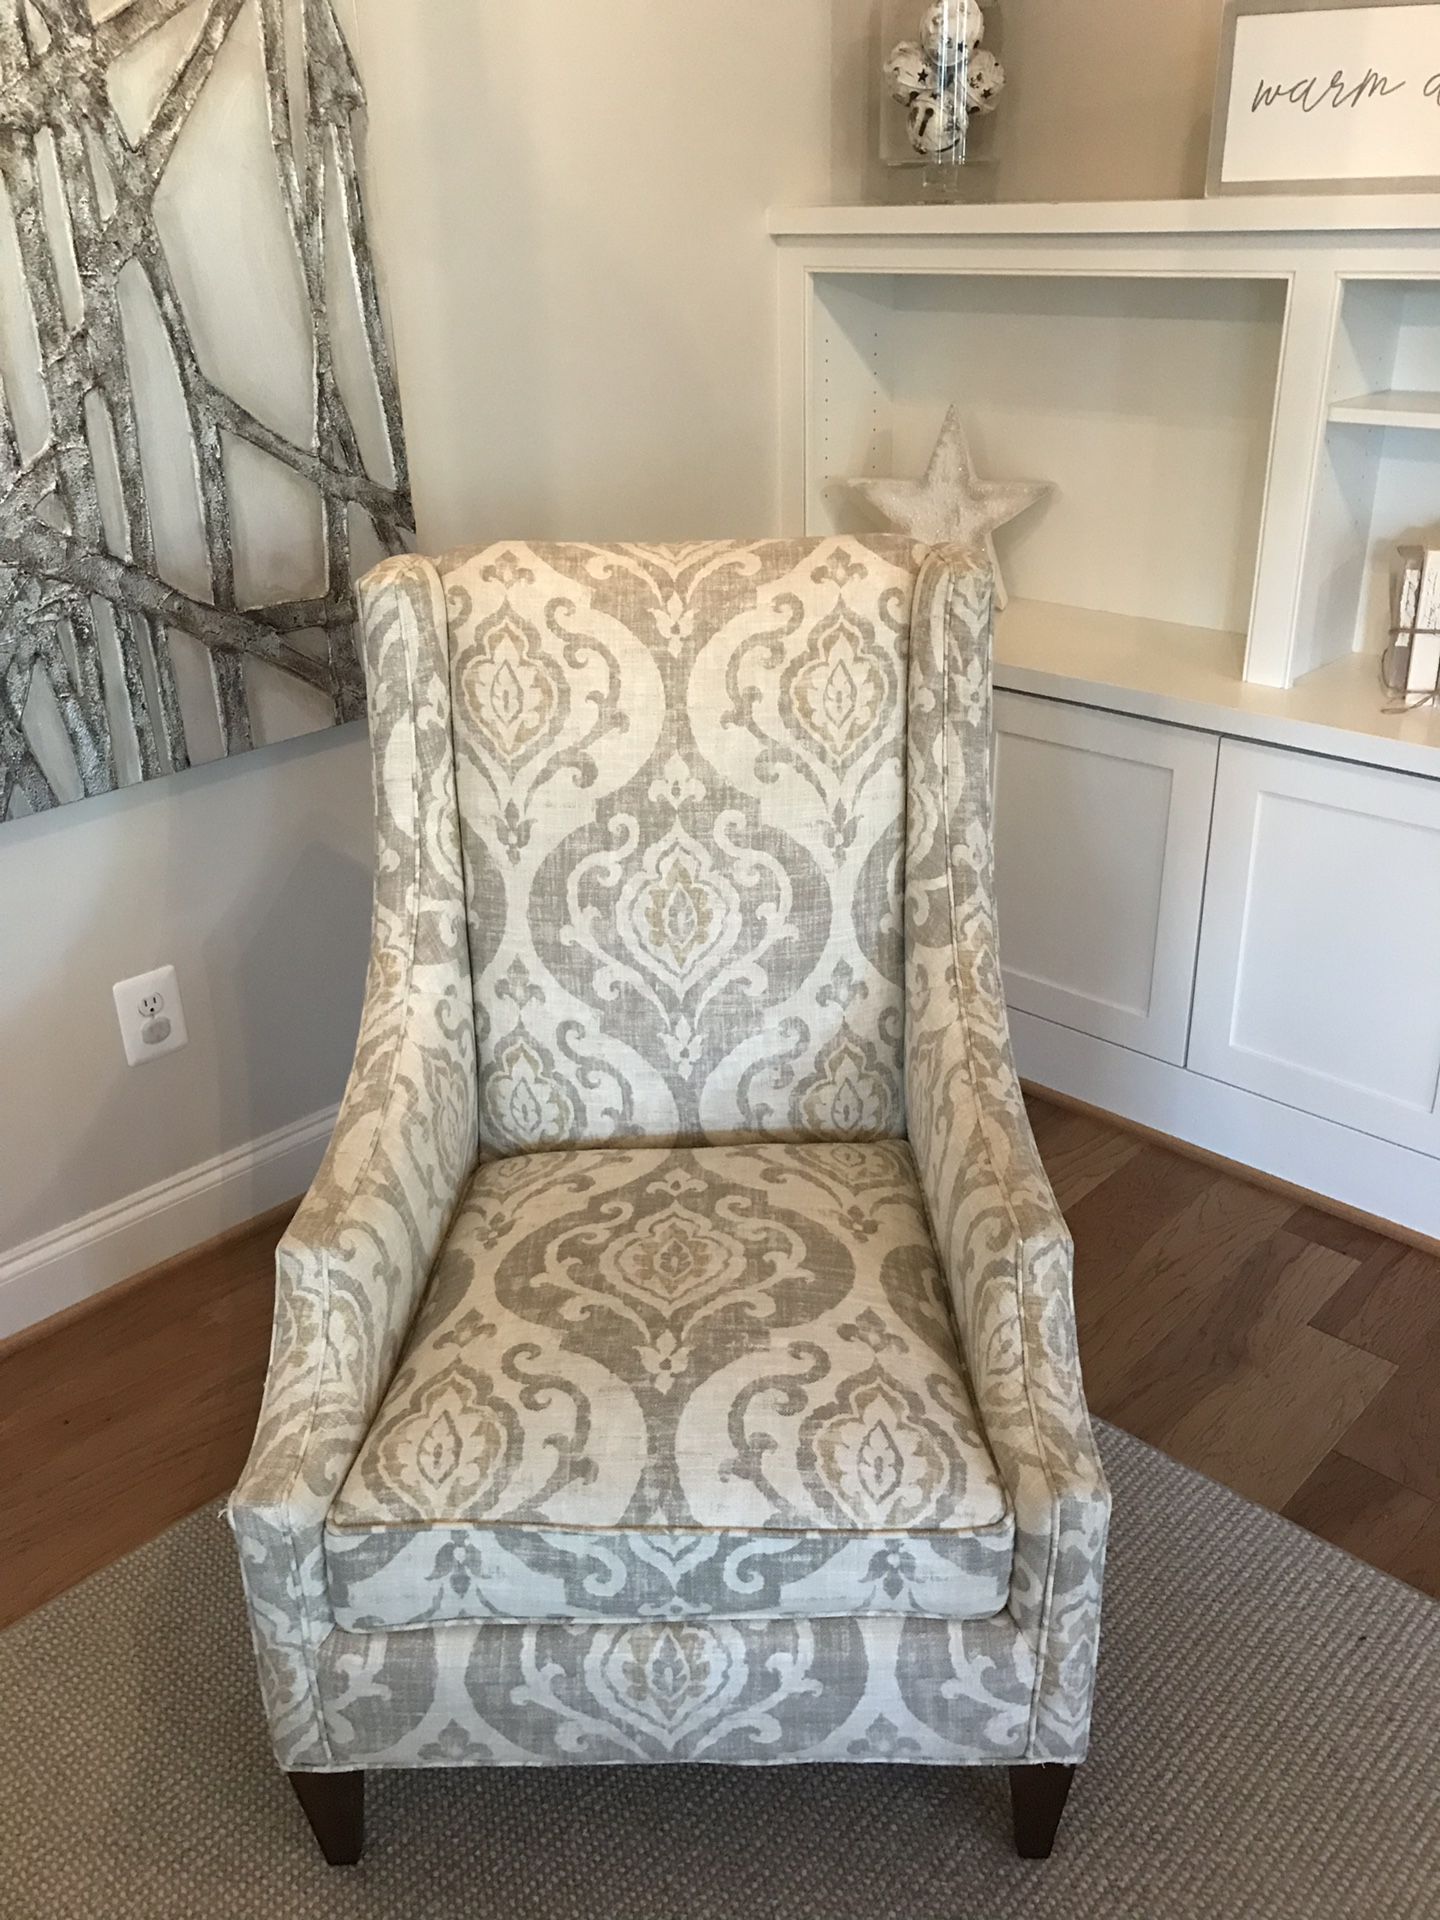 LIKE NEW- two Arhaus chairs and two custom pillows to match